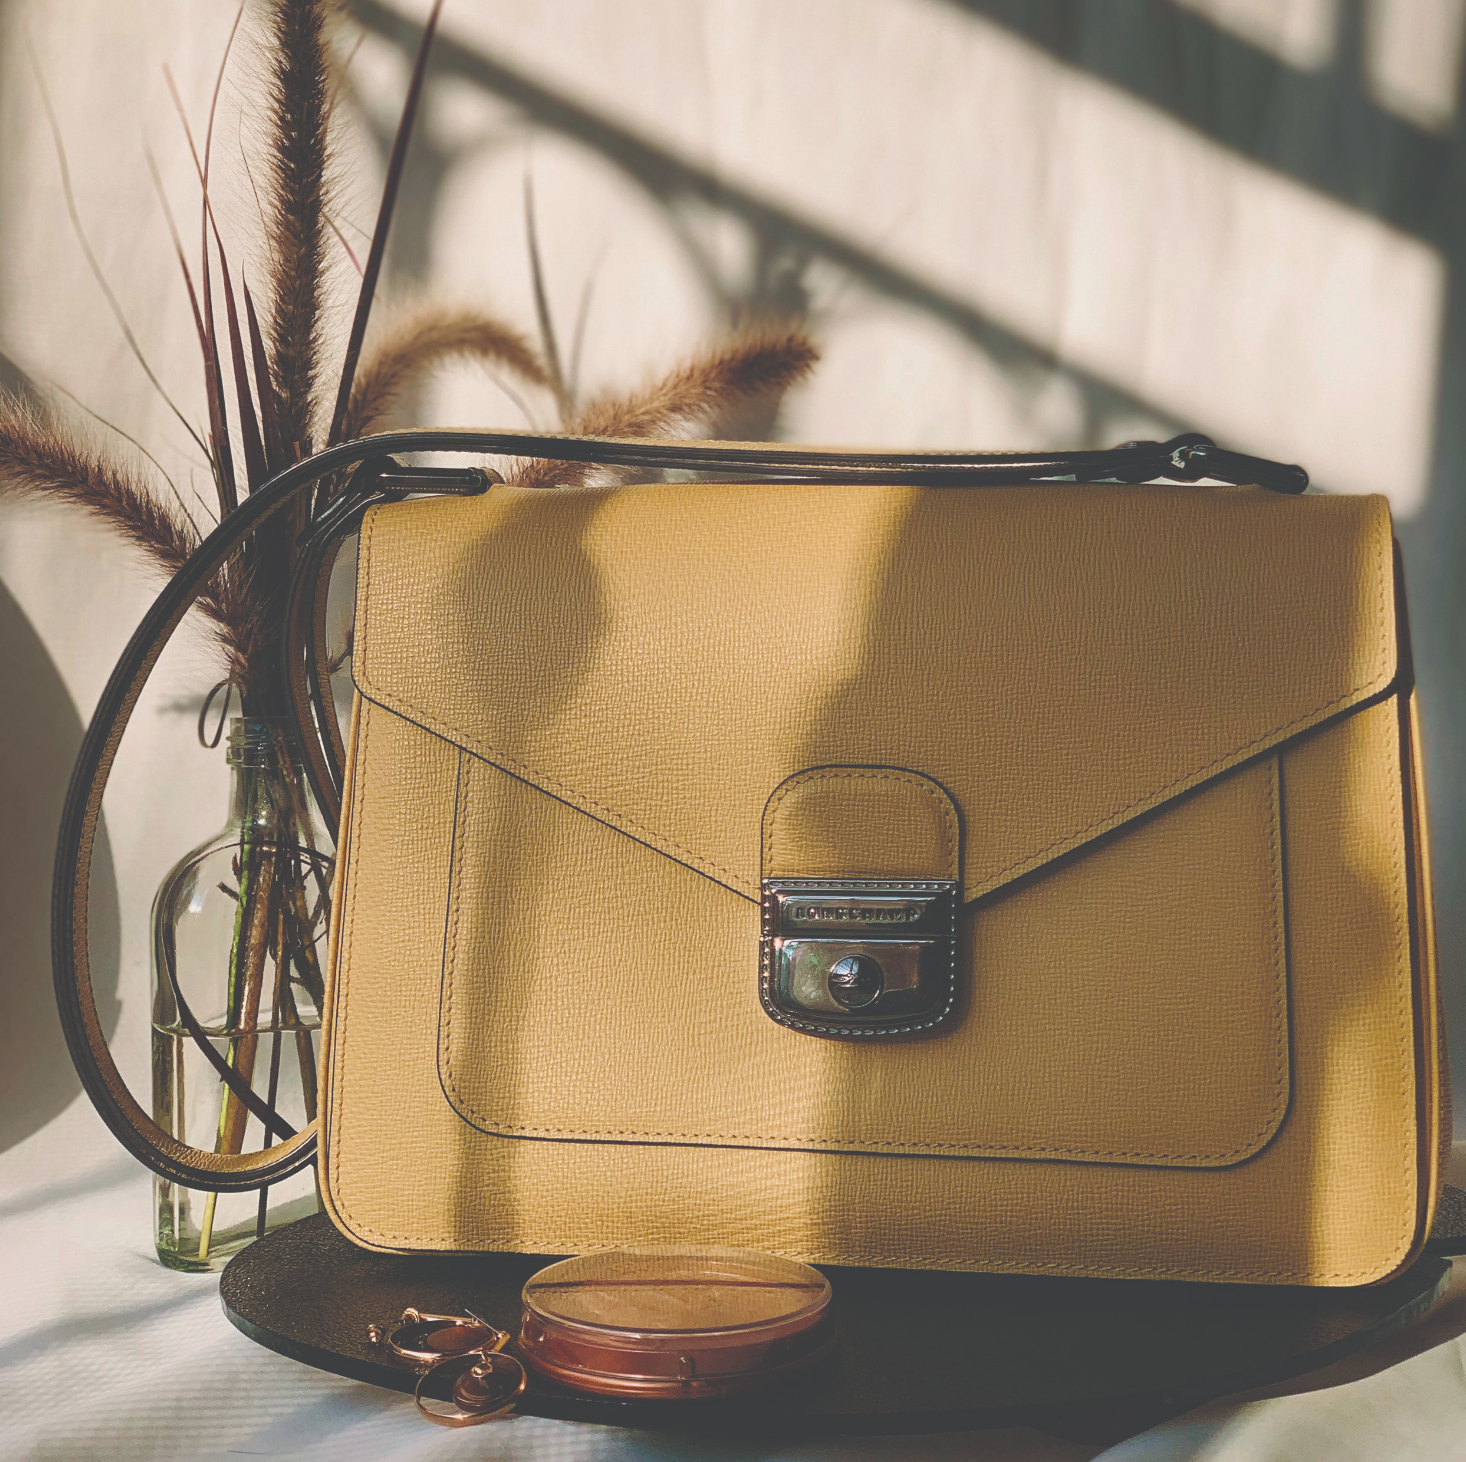 Is the Handbag You're Buying a Good Investment?